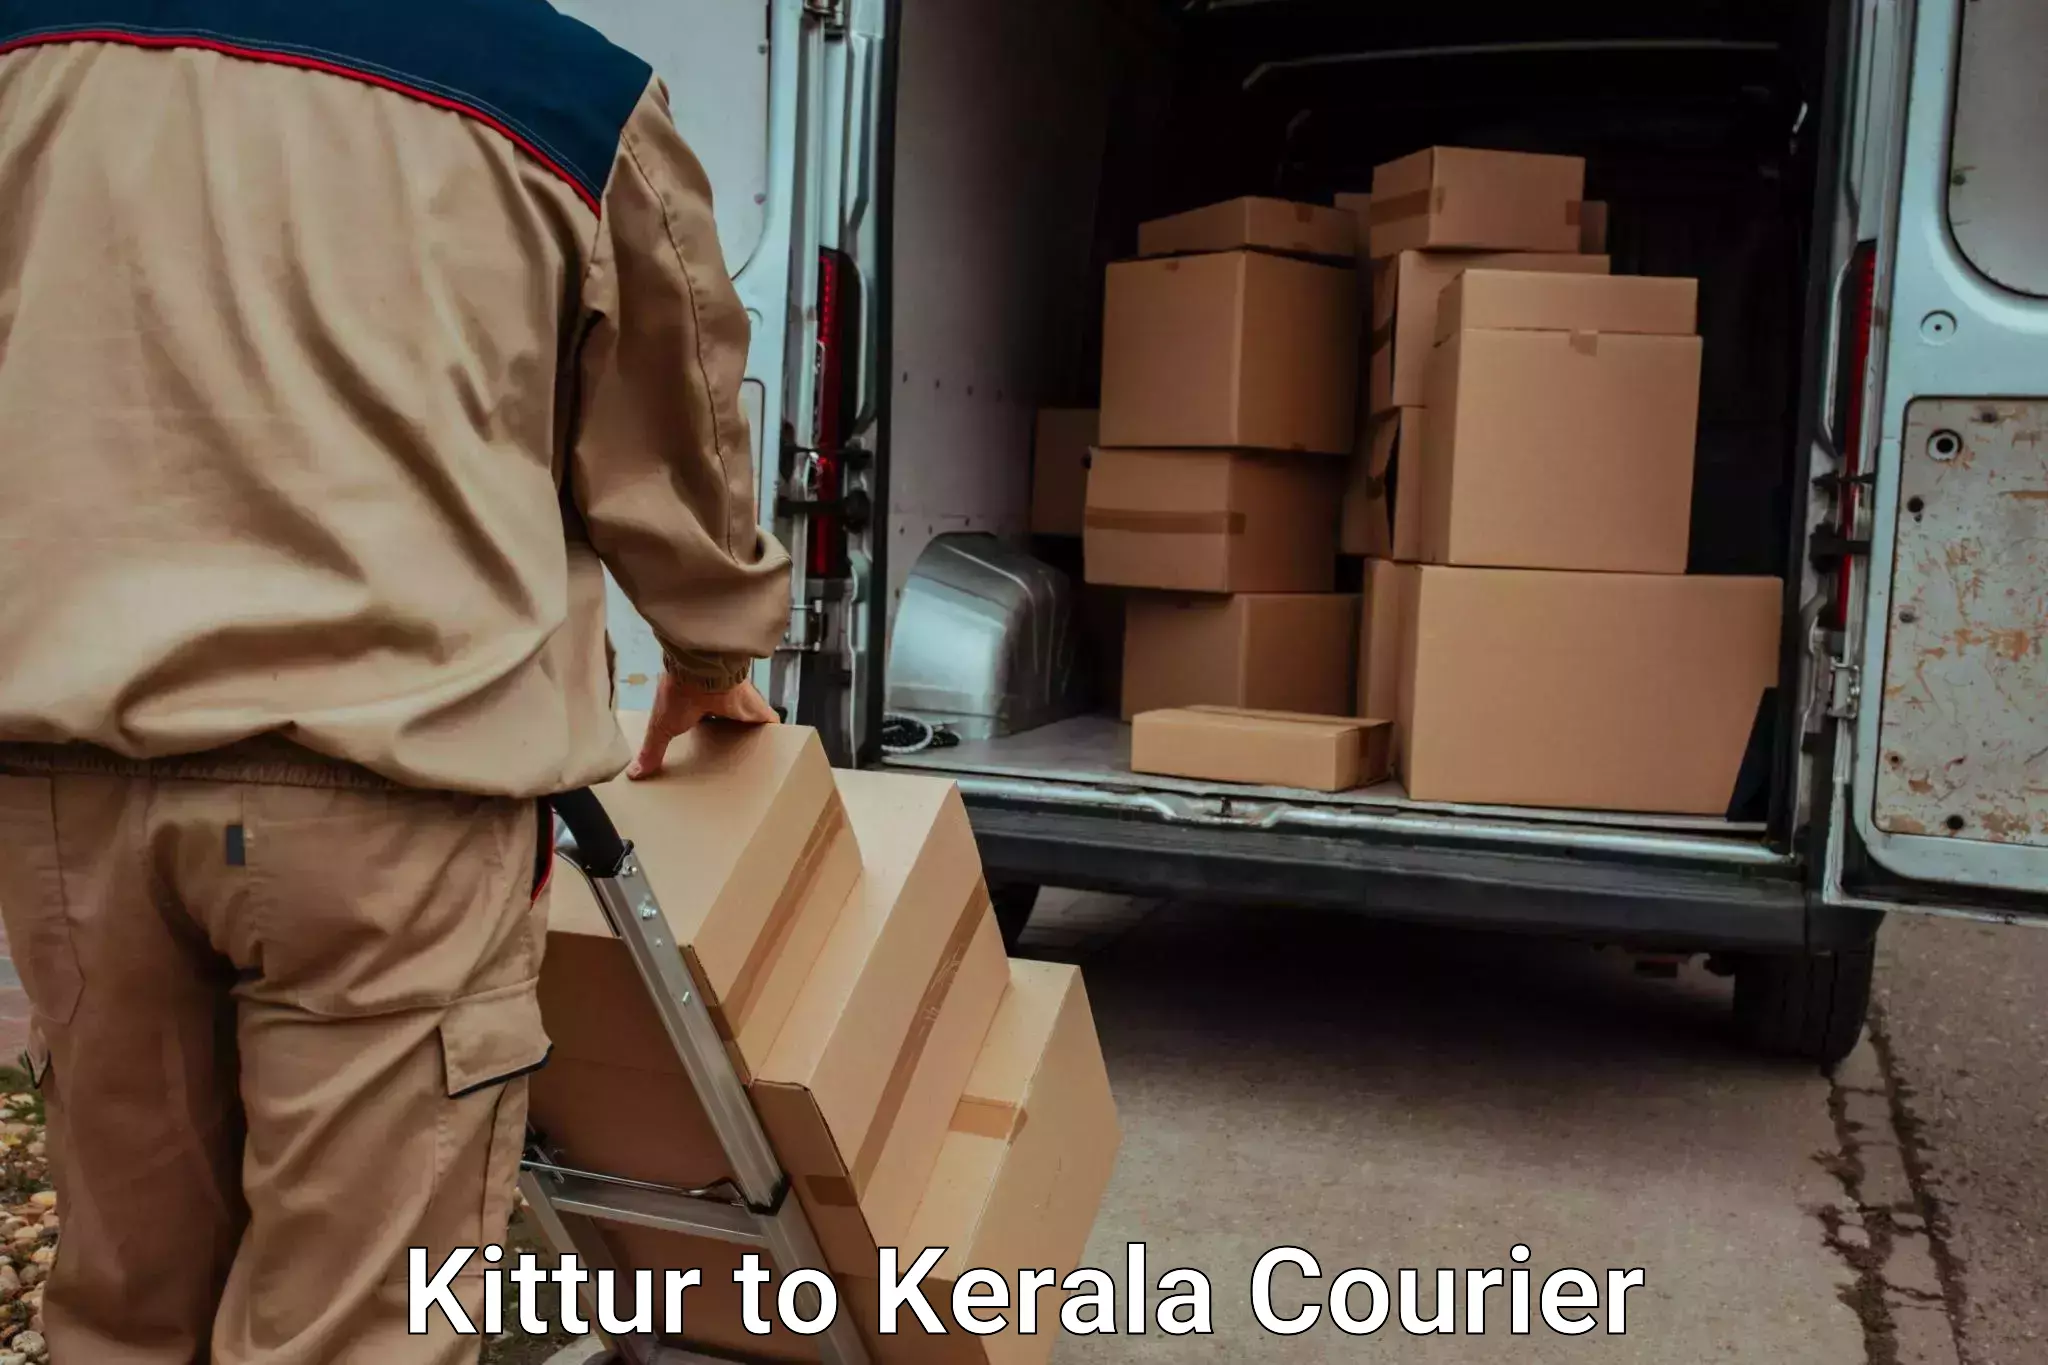 Moving and storage services Kittur to Munnar